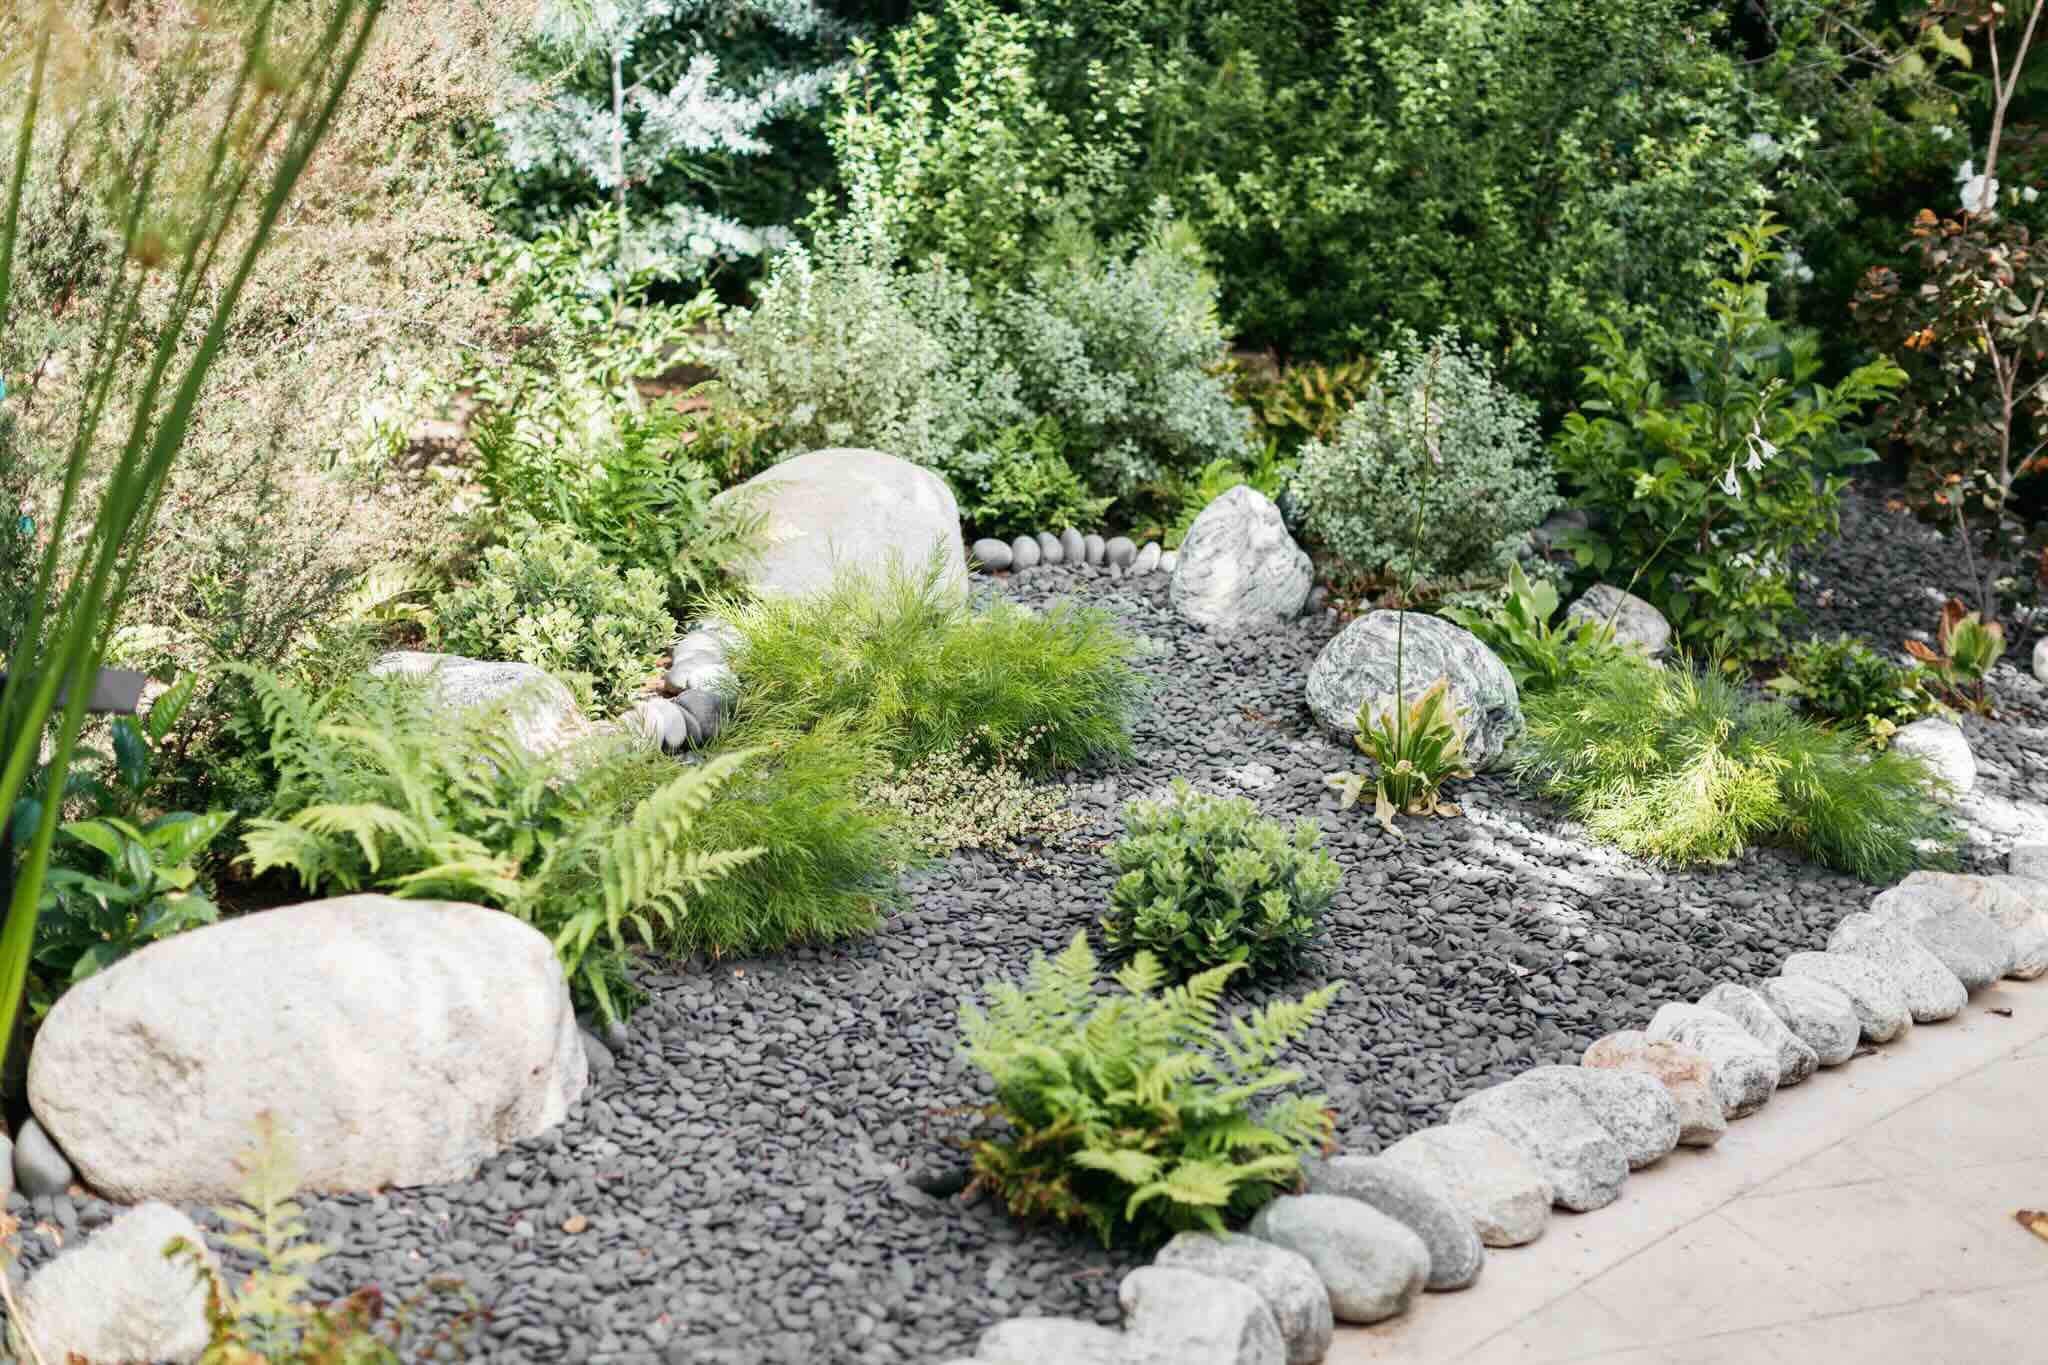 How To Make A Rock Garden Bed | Storables